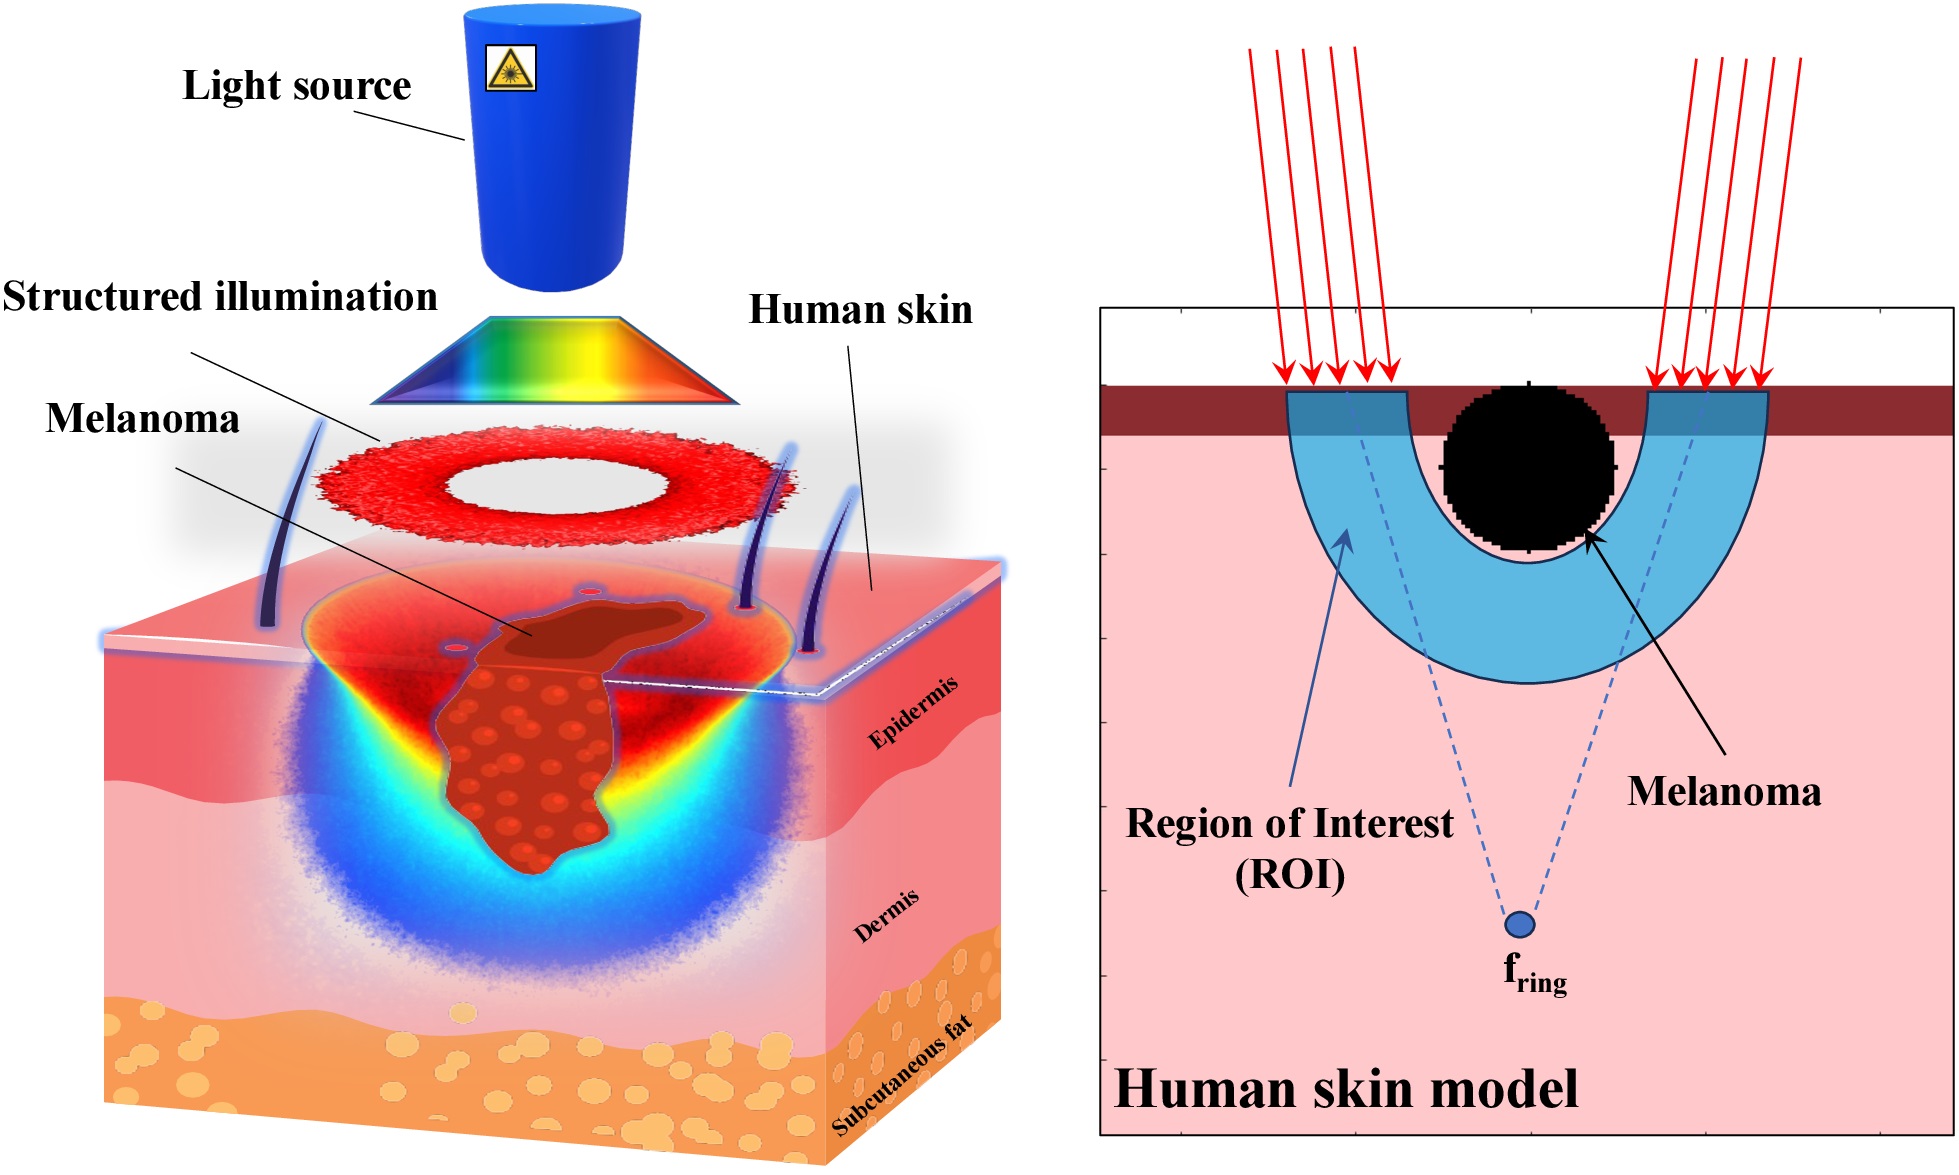 Photodynamic treatment of malignant melanoma with structured light: in silico Monte Carlo modeling.